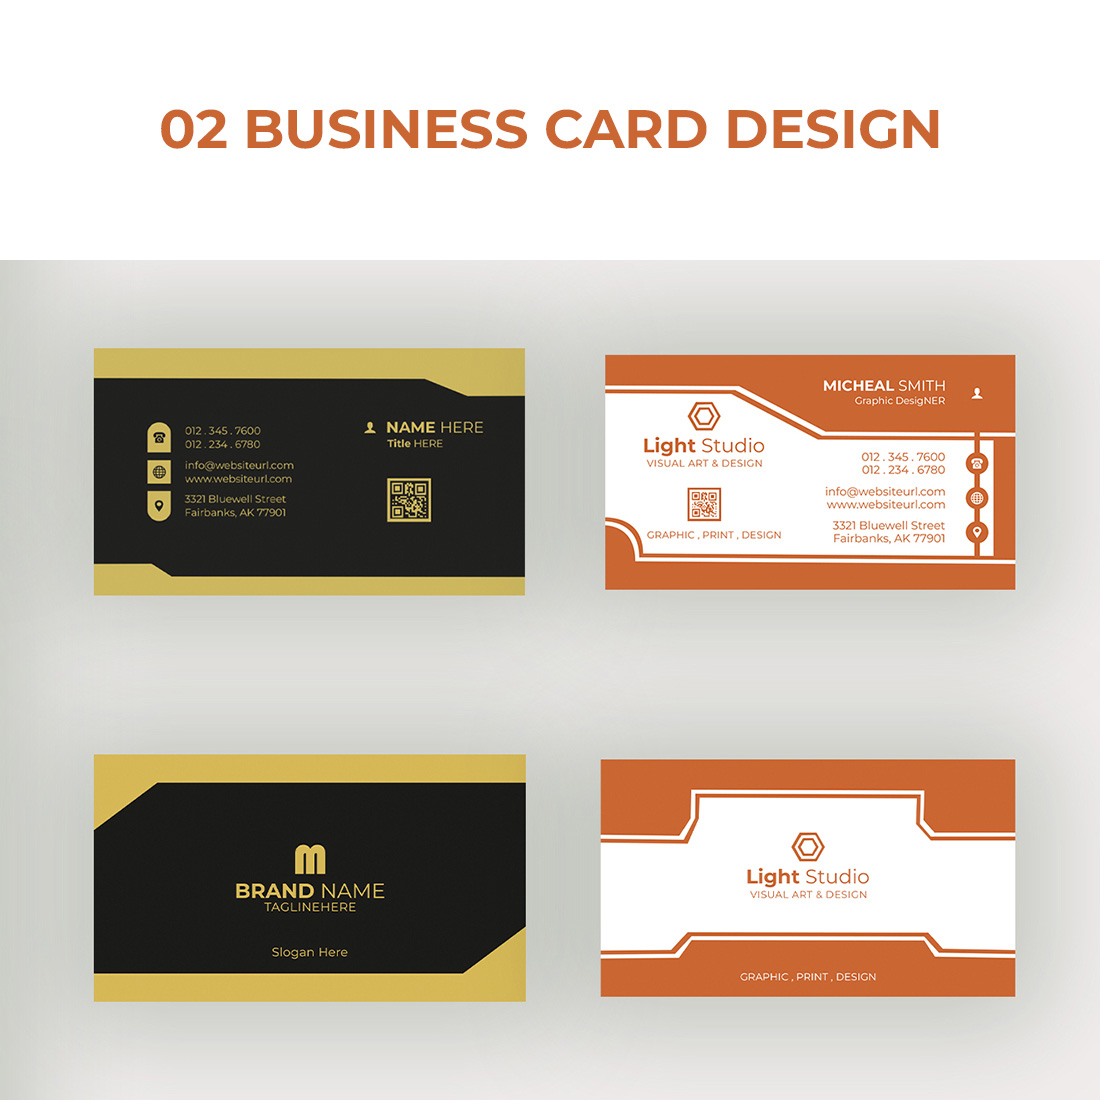 02Business Card Design Templates cover image.